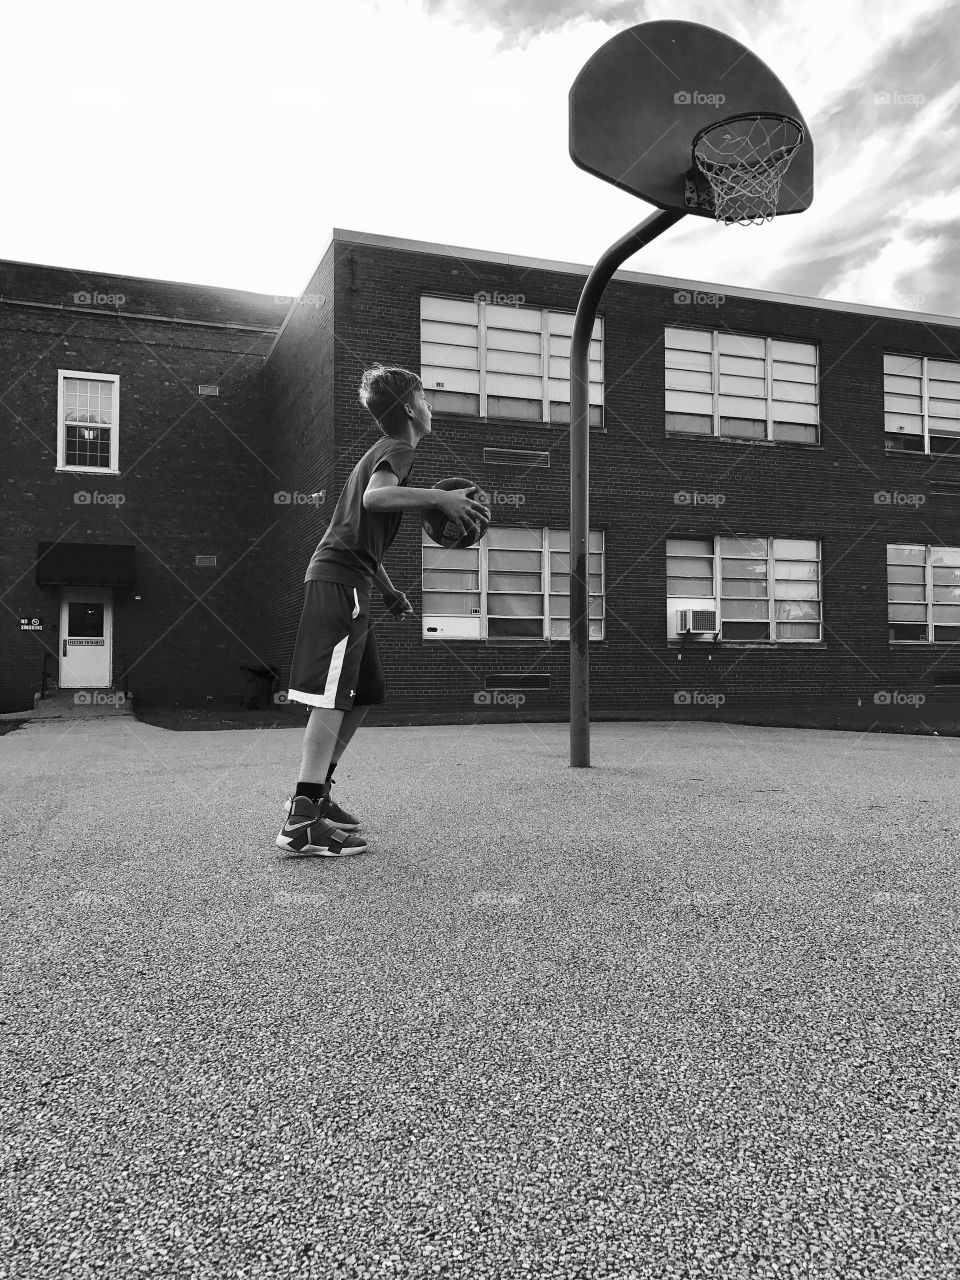 Student playing basketball in schoolyard